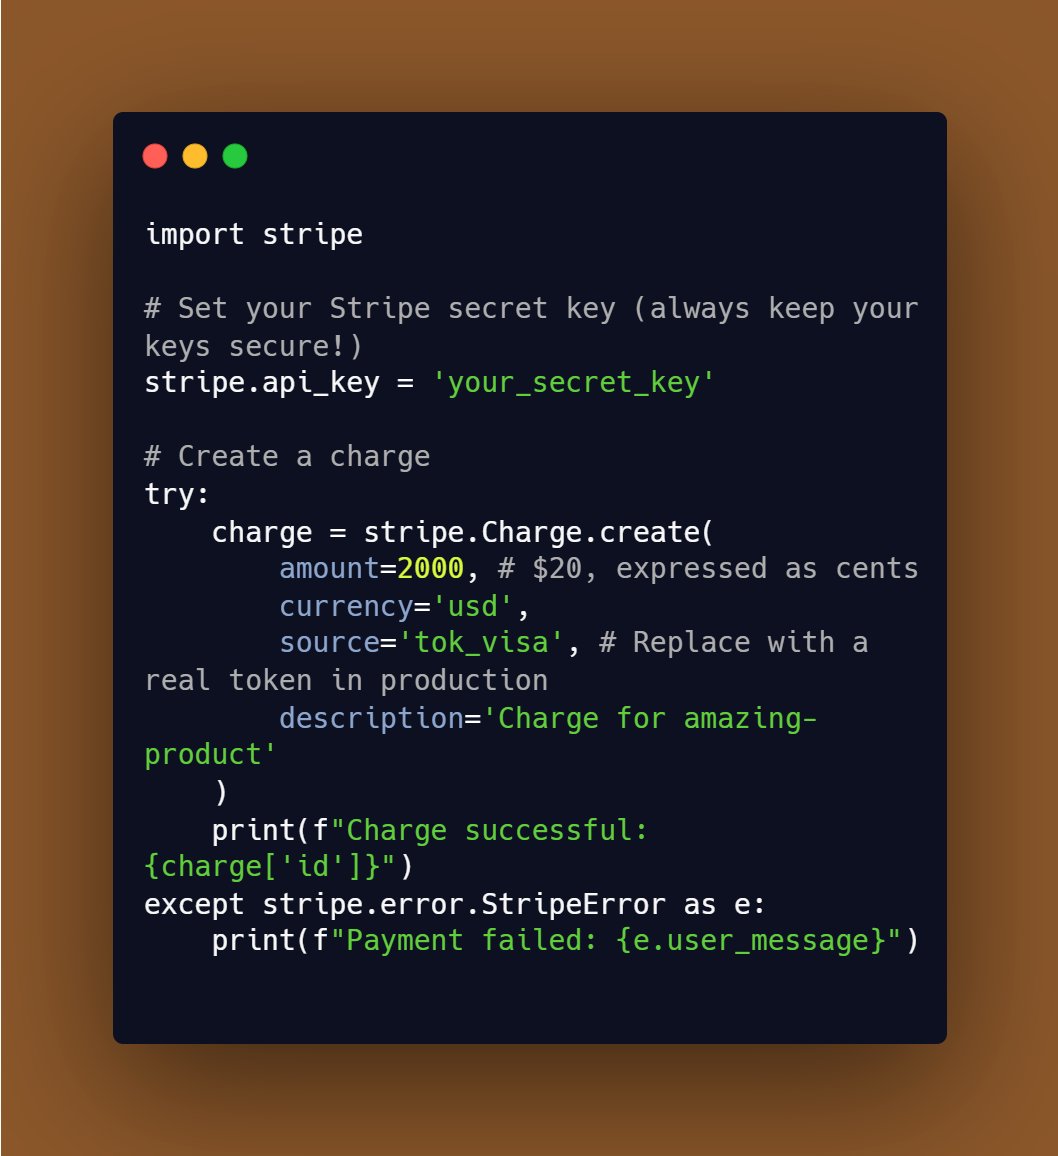 💳 Simplify online payments with Stripe! Here's a Python snippet to create a charge. Perfect for e-commerce developers! #PaymentGateways #Stripe #EcommerceBoost your sales with secure, efficient payment processing! 🚀 #WebDevelopment #TechTips #Fintech